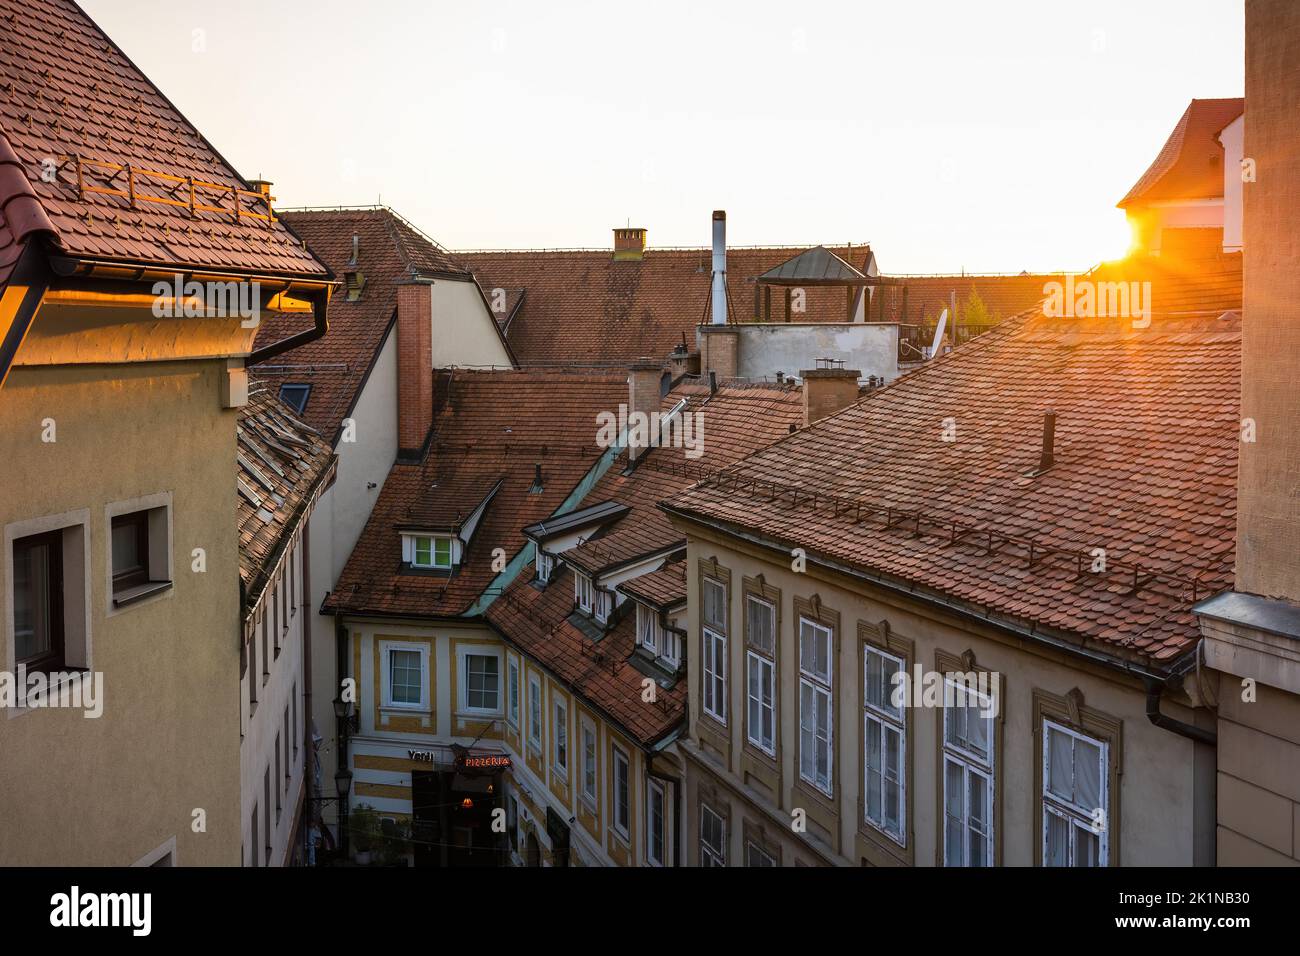 Sun setting over rooftops with red tiles in a city with old houses Stock Photo